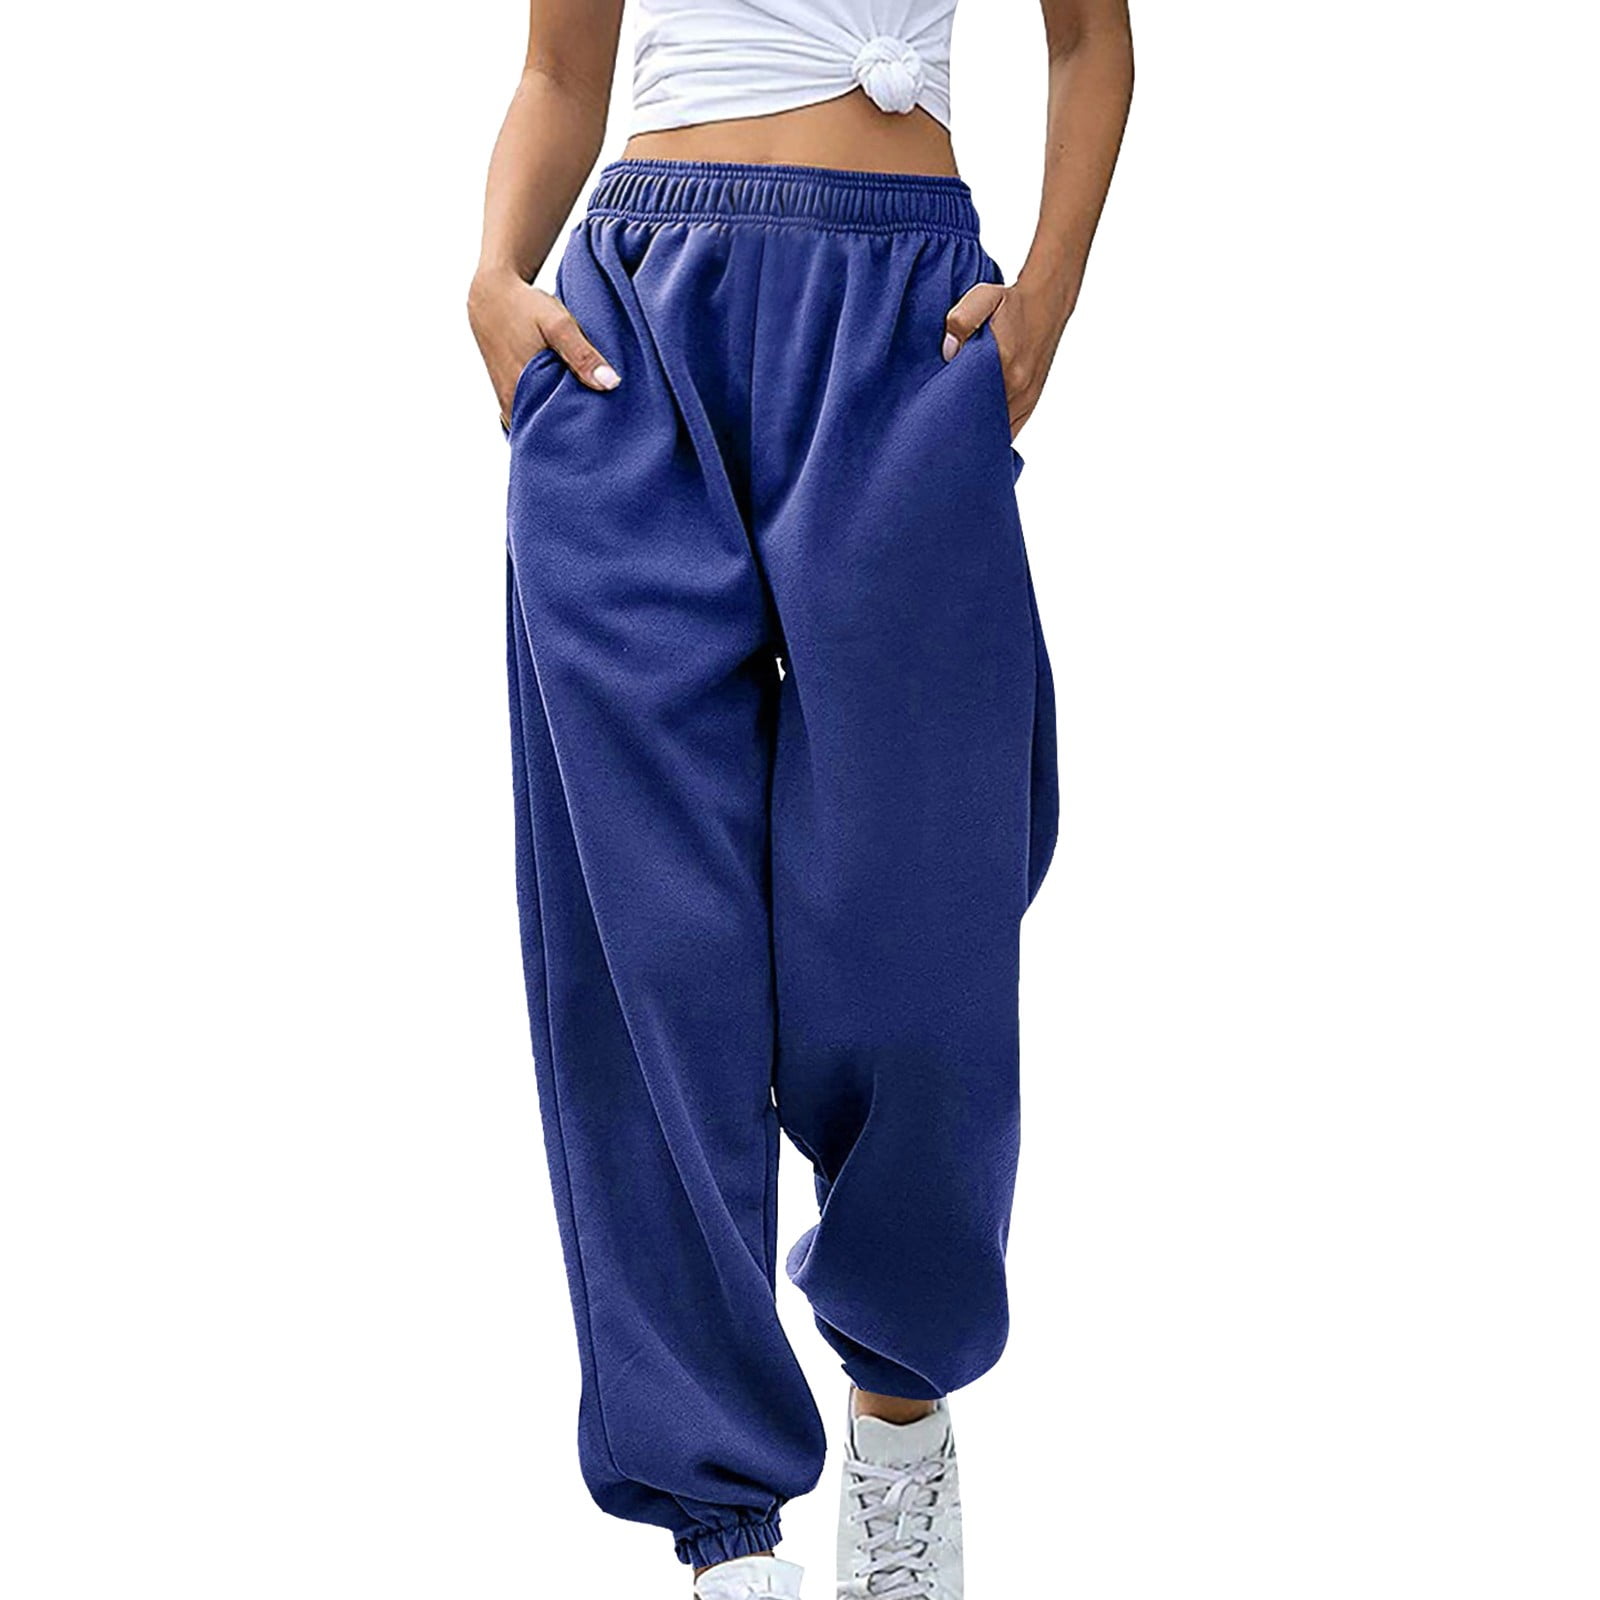 Sweatpants for Women Cinch Bottom Drawstring Elastic Waist Pants Sporty Gym  Athletic Yoga Joggers Lounge Trousers with Pocket